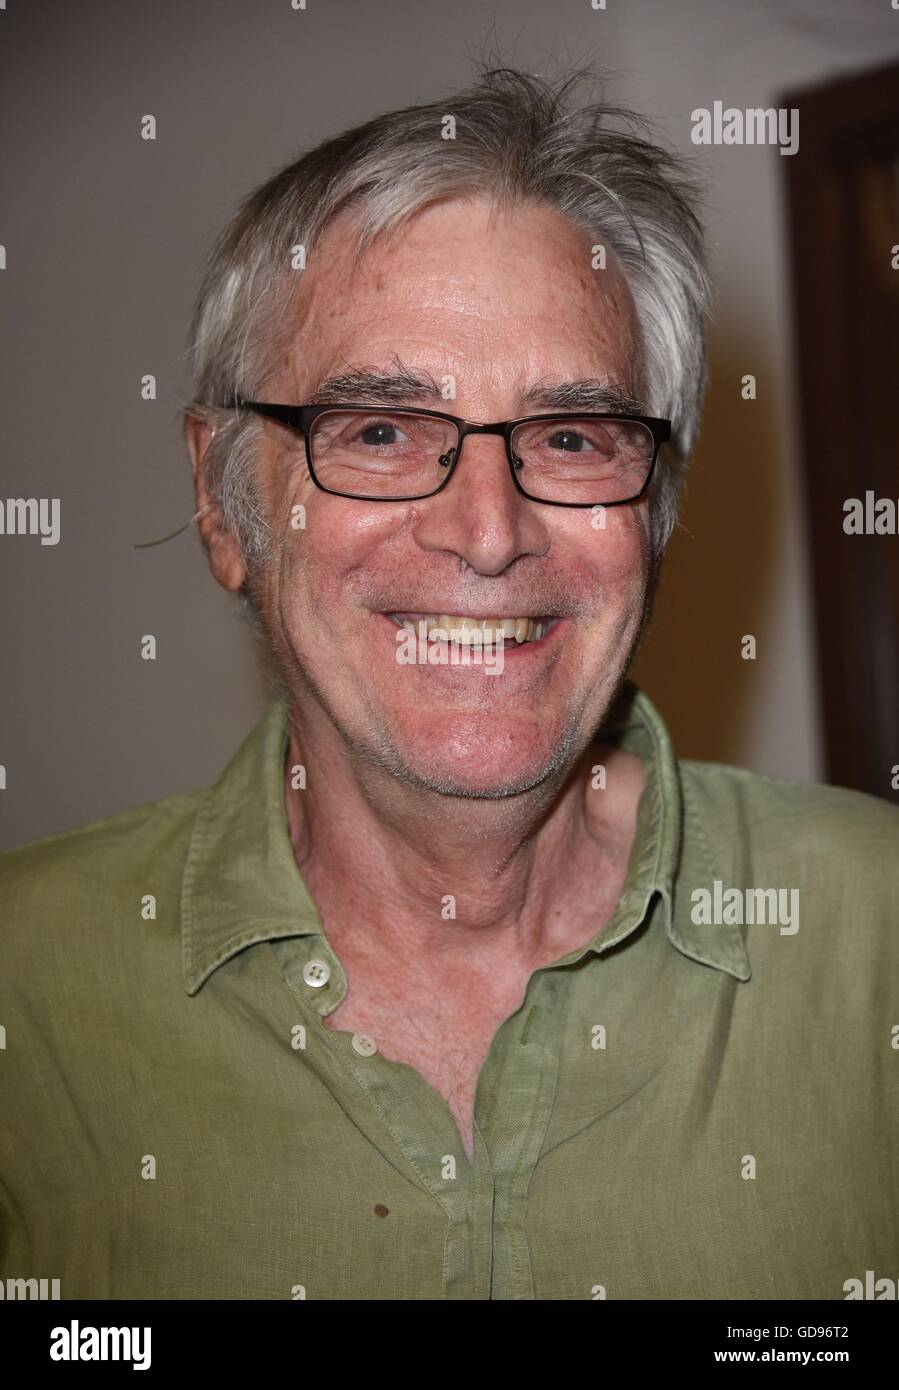 New York, NY, USA. 14th July, 2016. Jake Holmes at in-store appearance for The Lost Rockers: Broken Dreams and Crashed Careers Book Release Event, Strand Bookstore, New York, NY July 14, 2016. Credit:  Derek Storm/Everett Collection/Alamy Live News Stock Photo